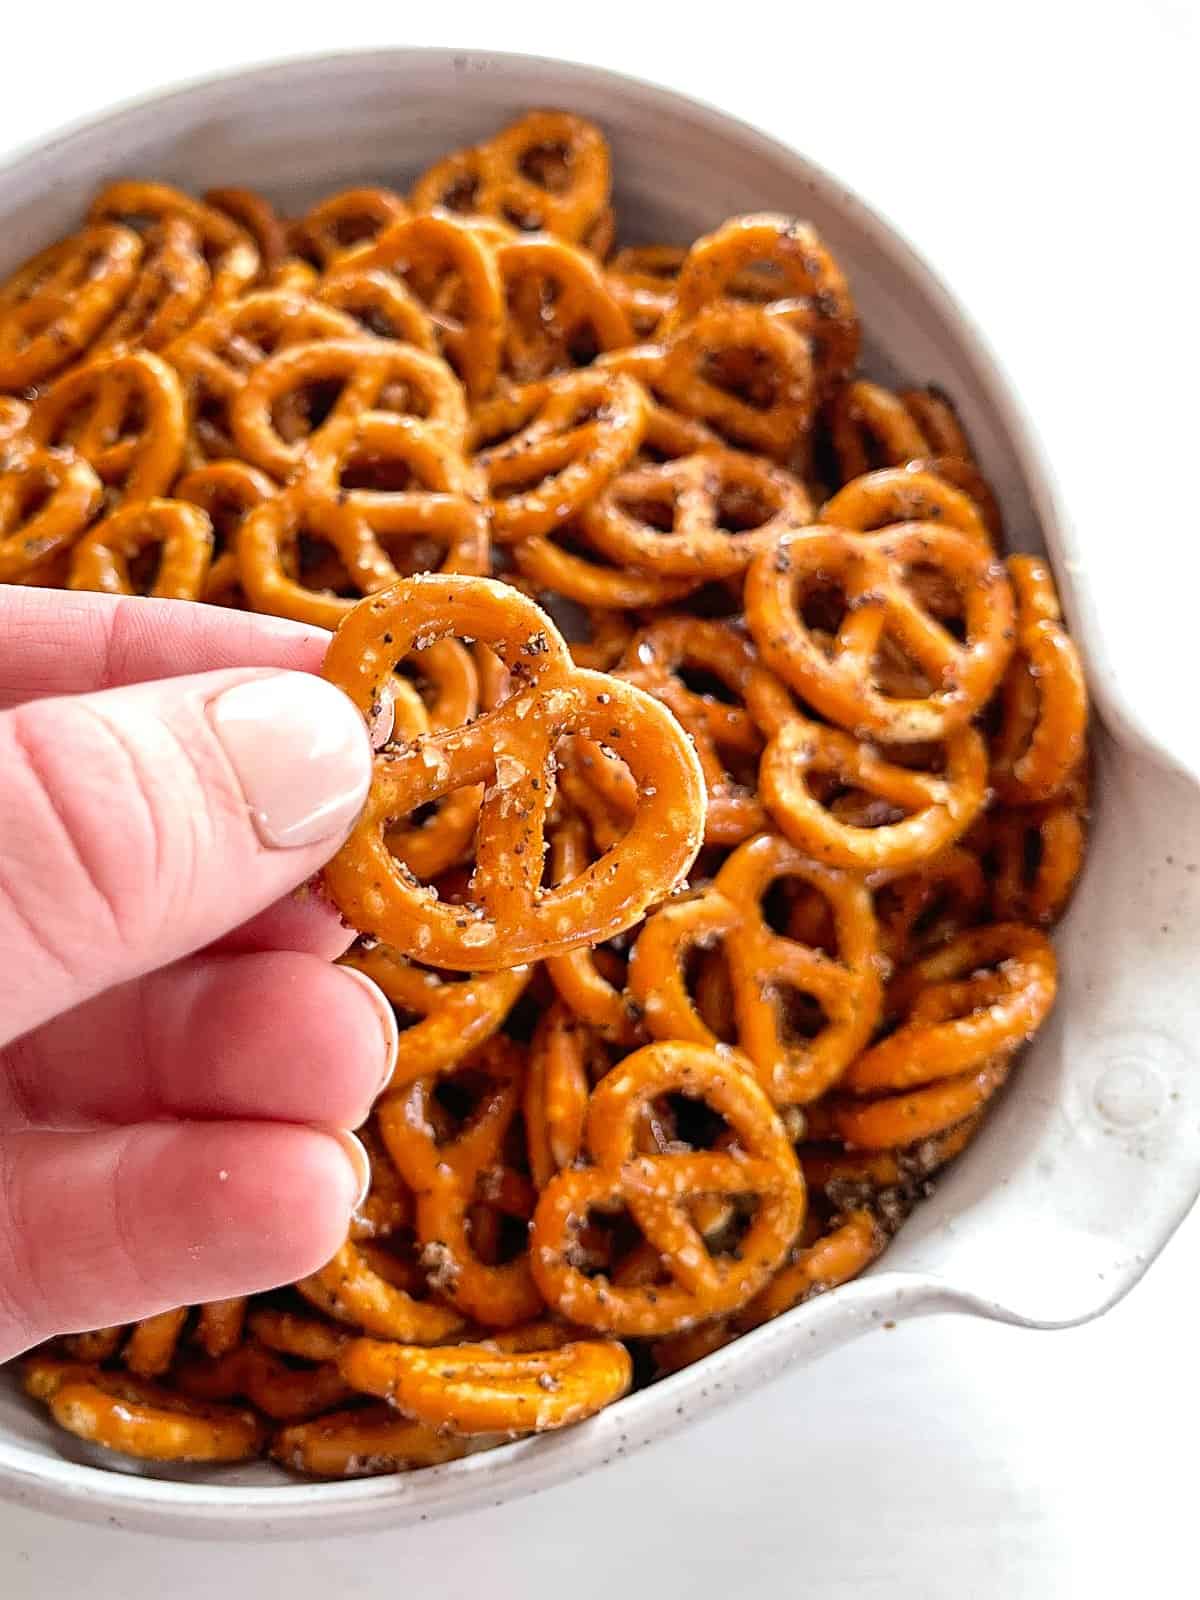 a close up photo of a white bowl filled with pretzel twists with a hand holding one pretzel close to the camera